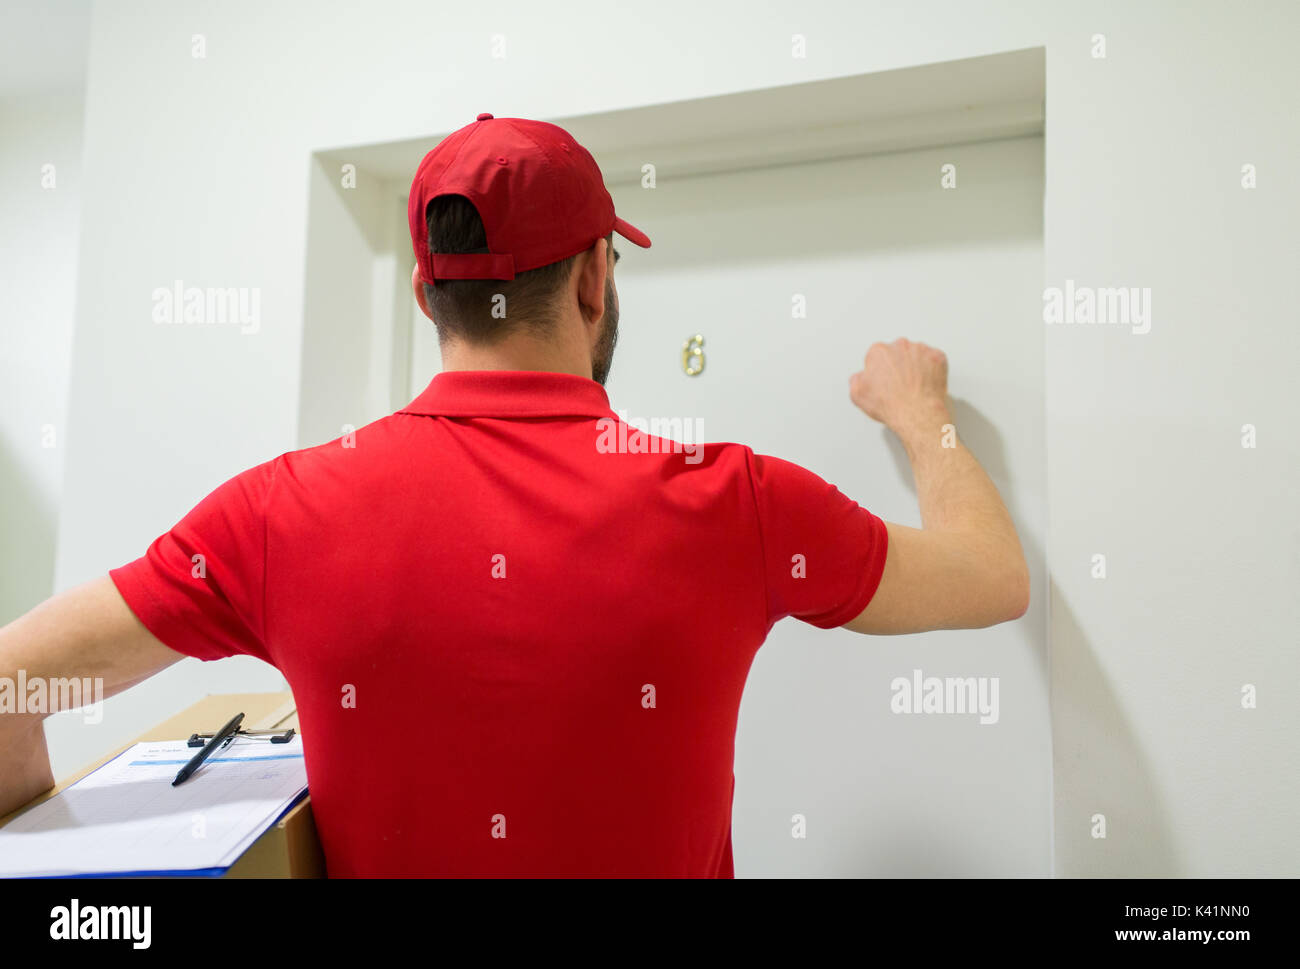 delivery man with parcel box knocking door Stock Photo